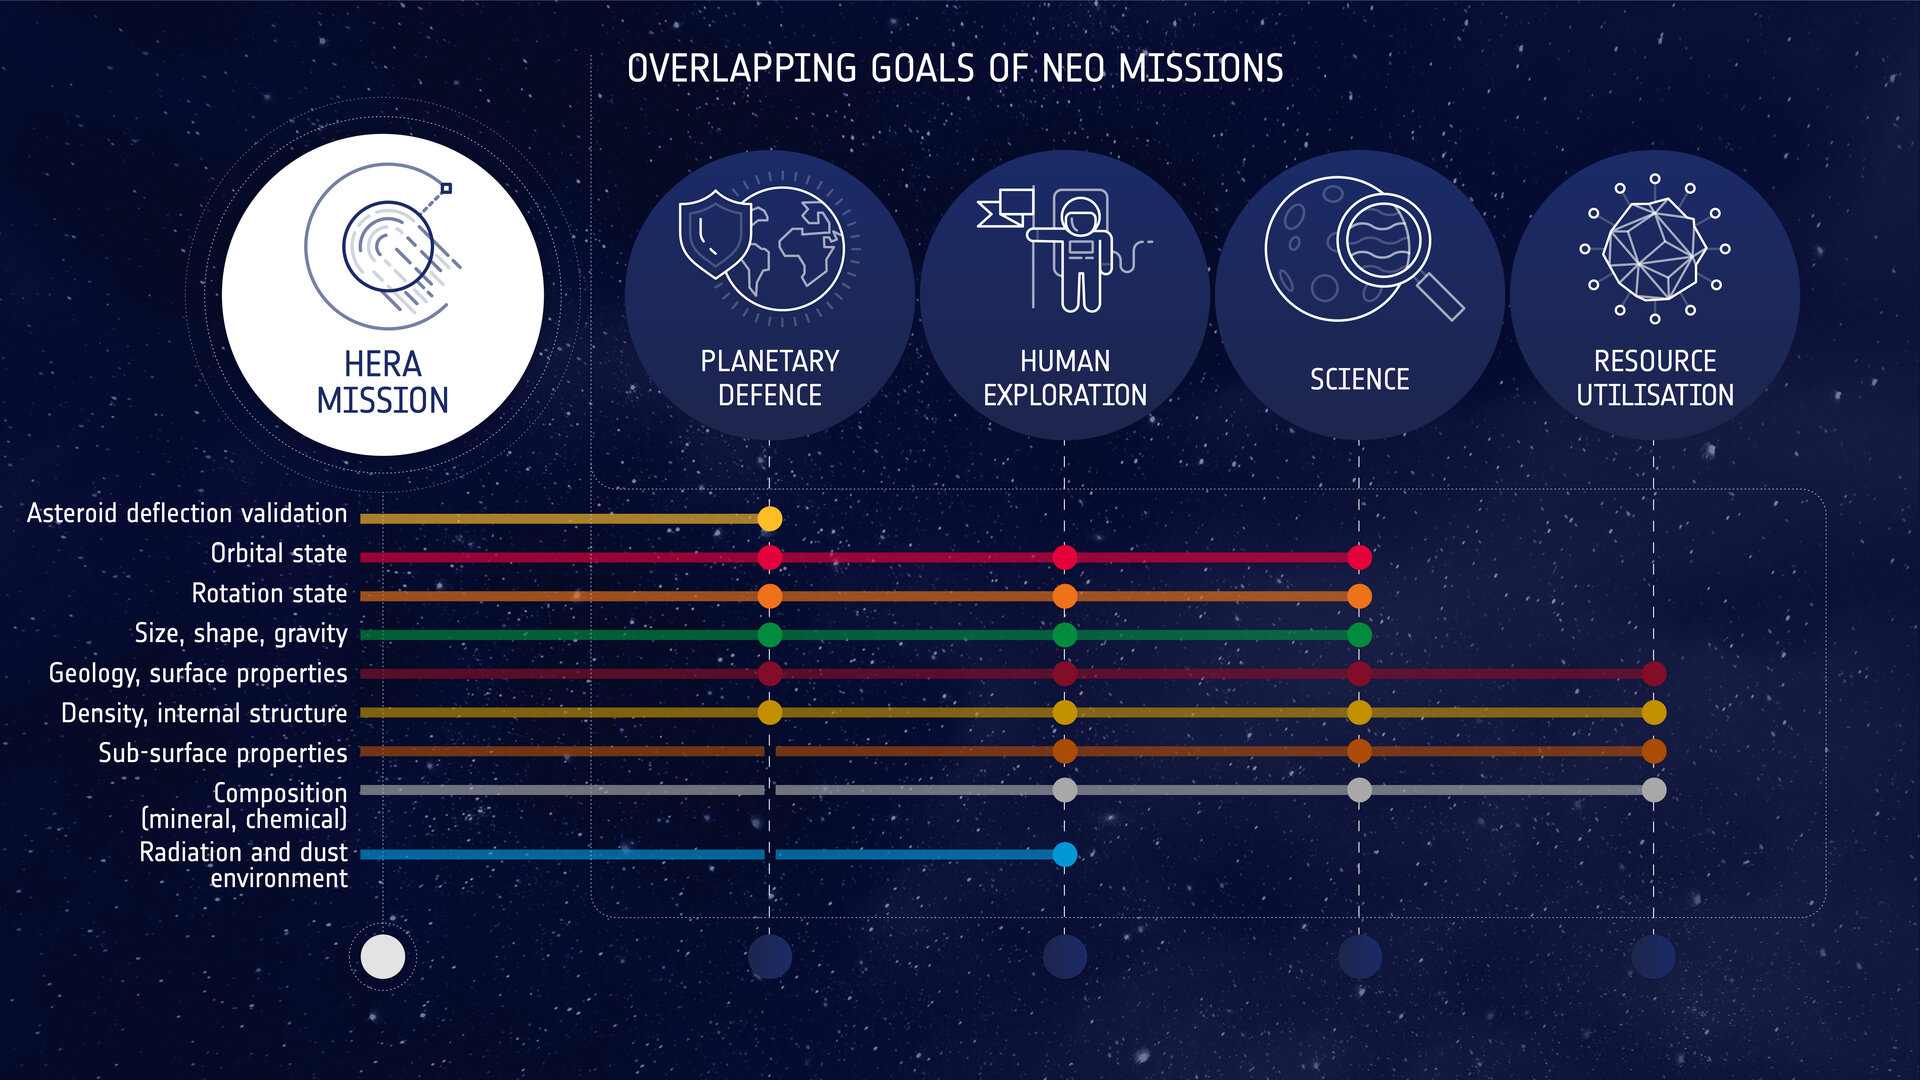 Goals of the Hera mission